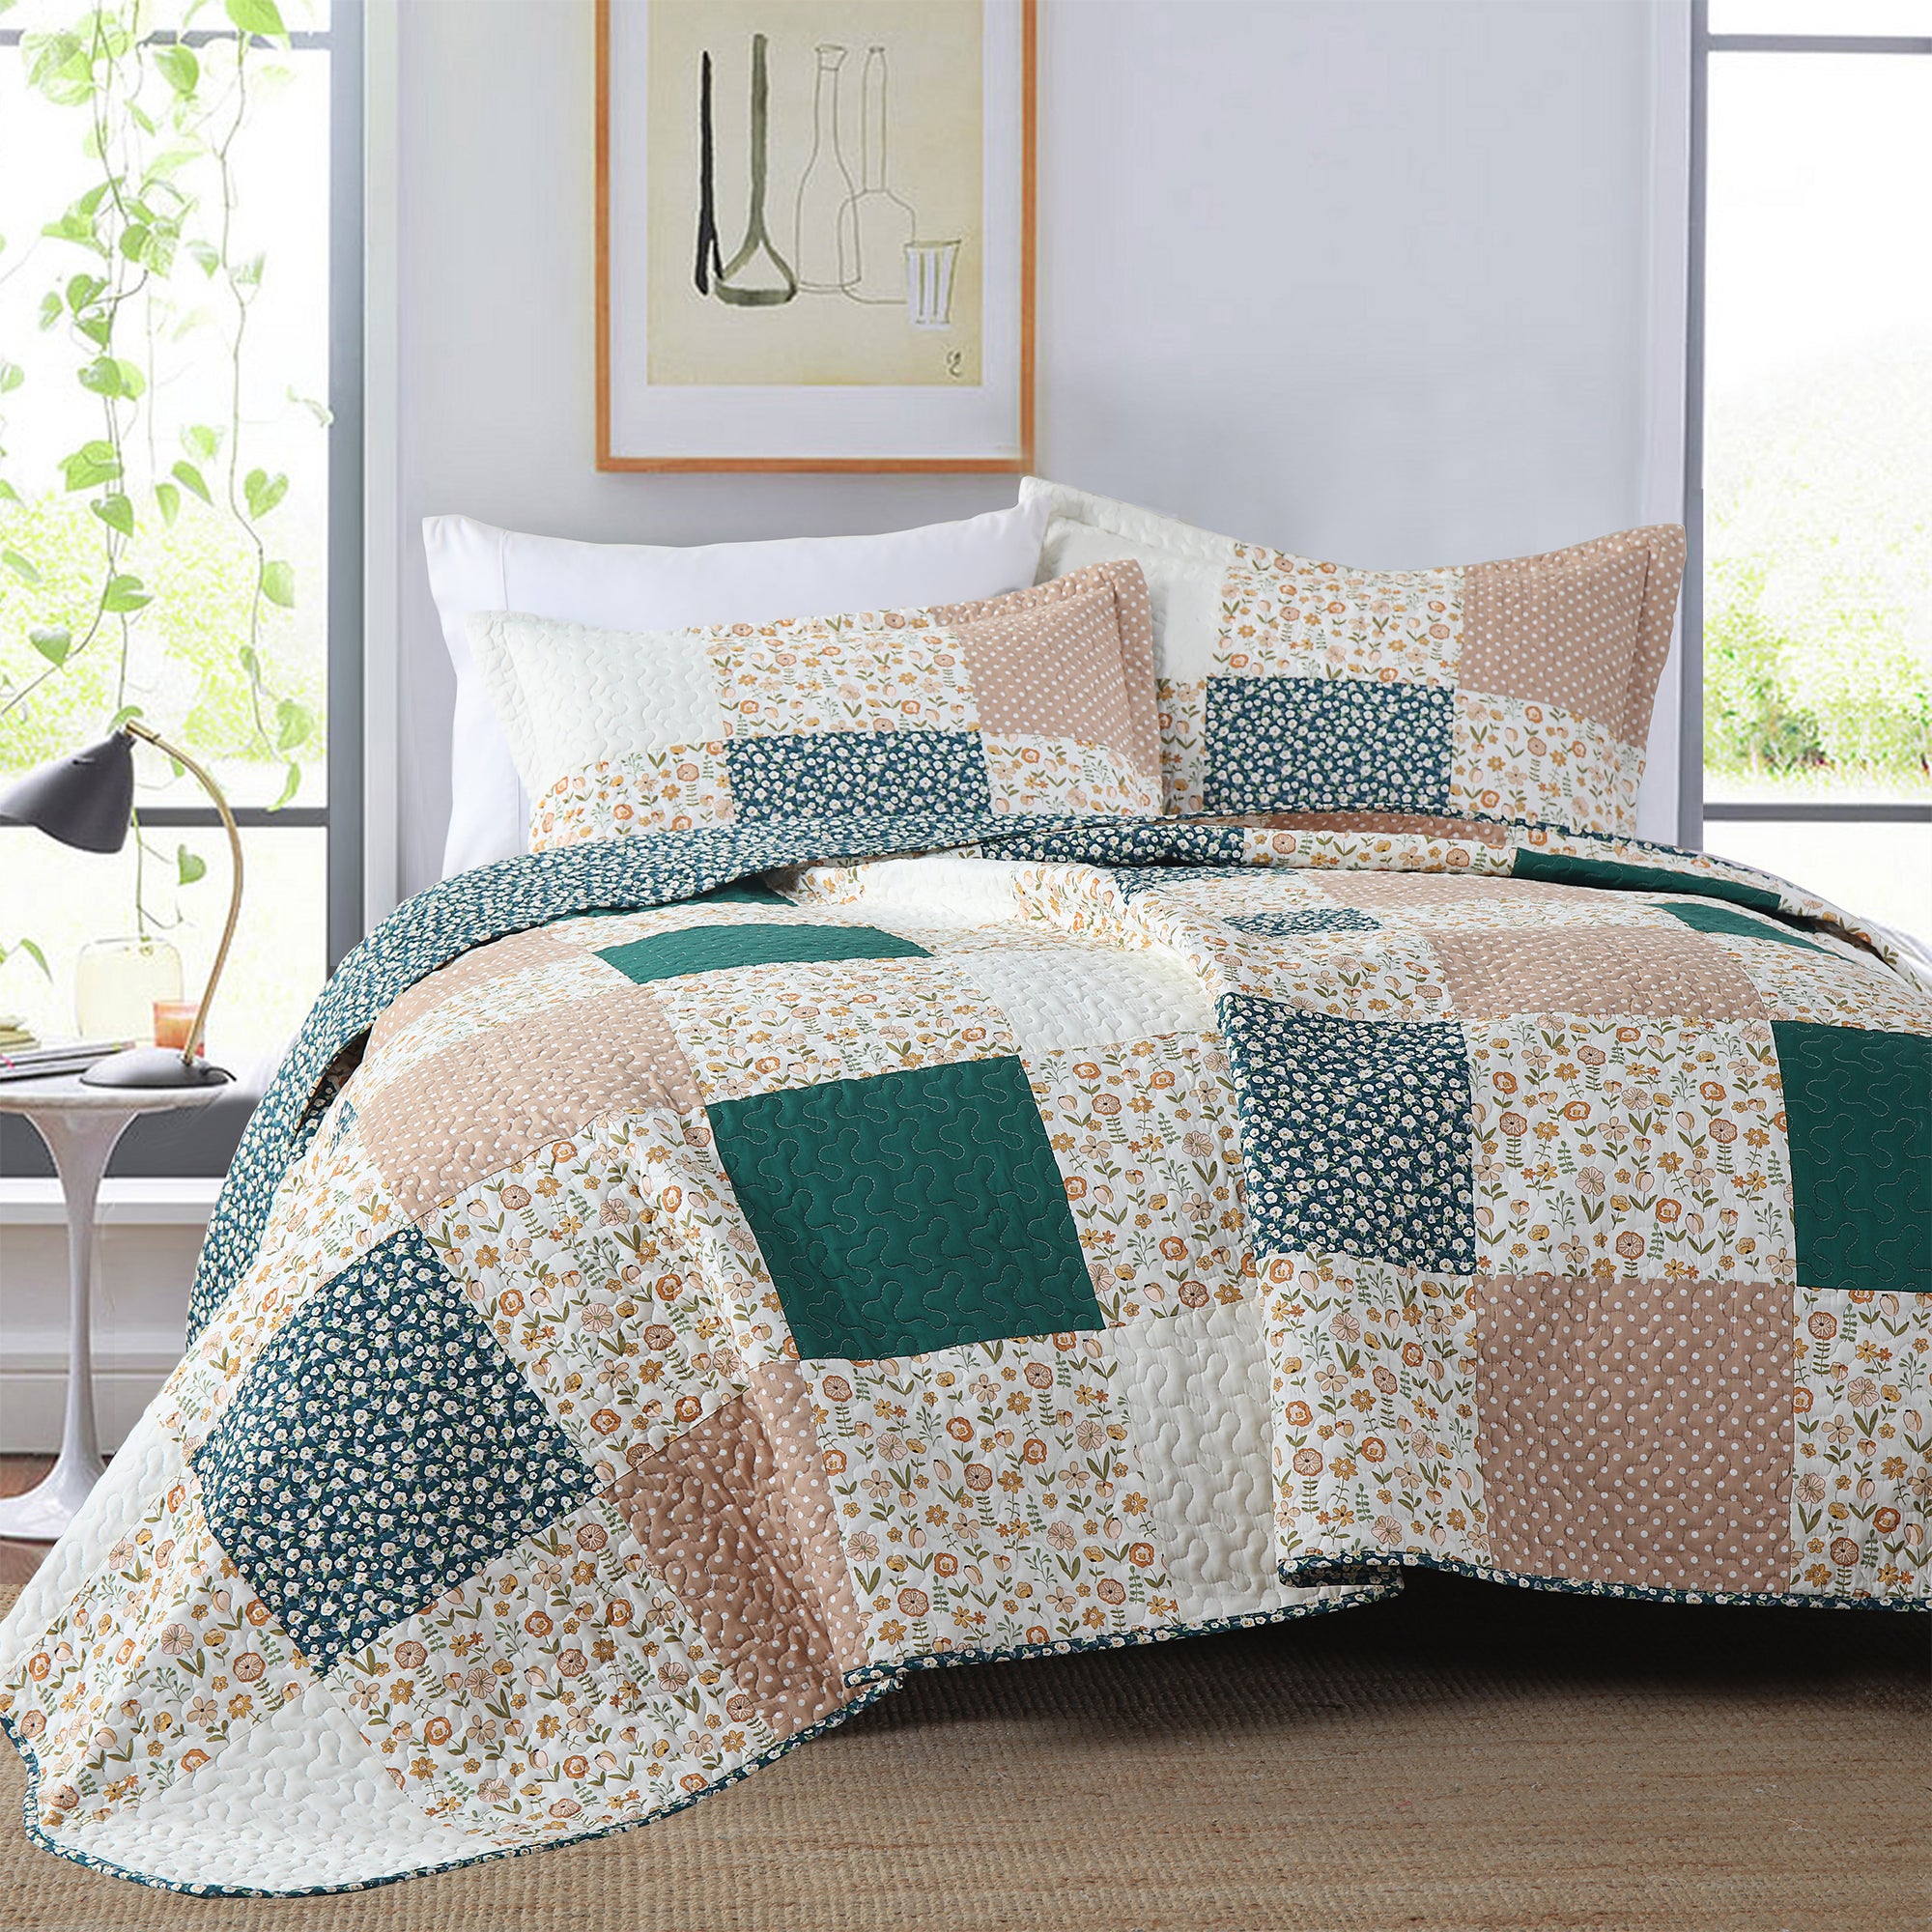 Handcrafted Patchwork Cotton Quilt Bedspread Set - 3-Piece Vintage Style Holiday Bedding PW102